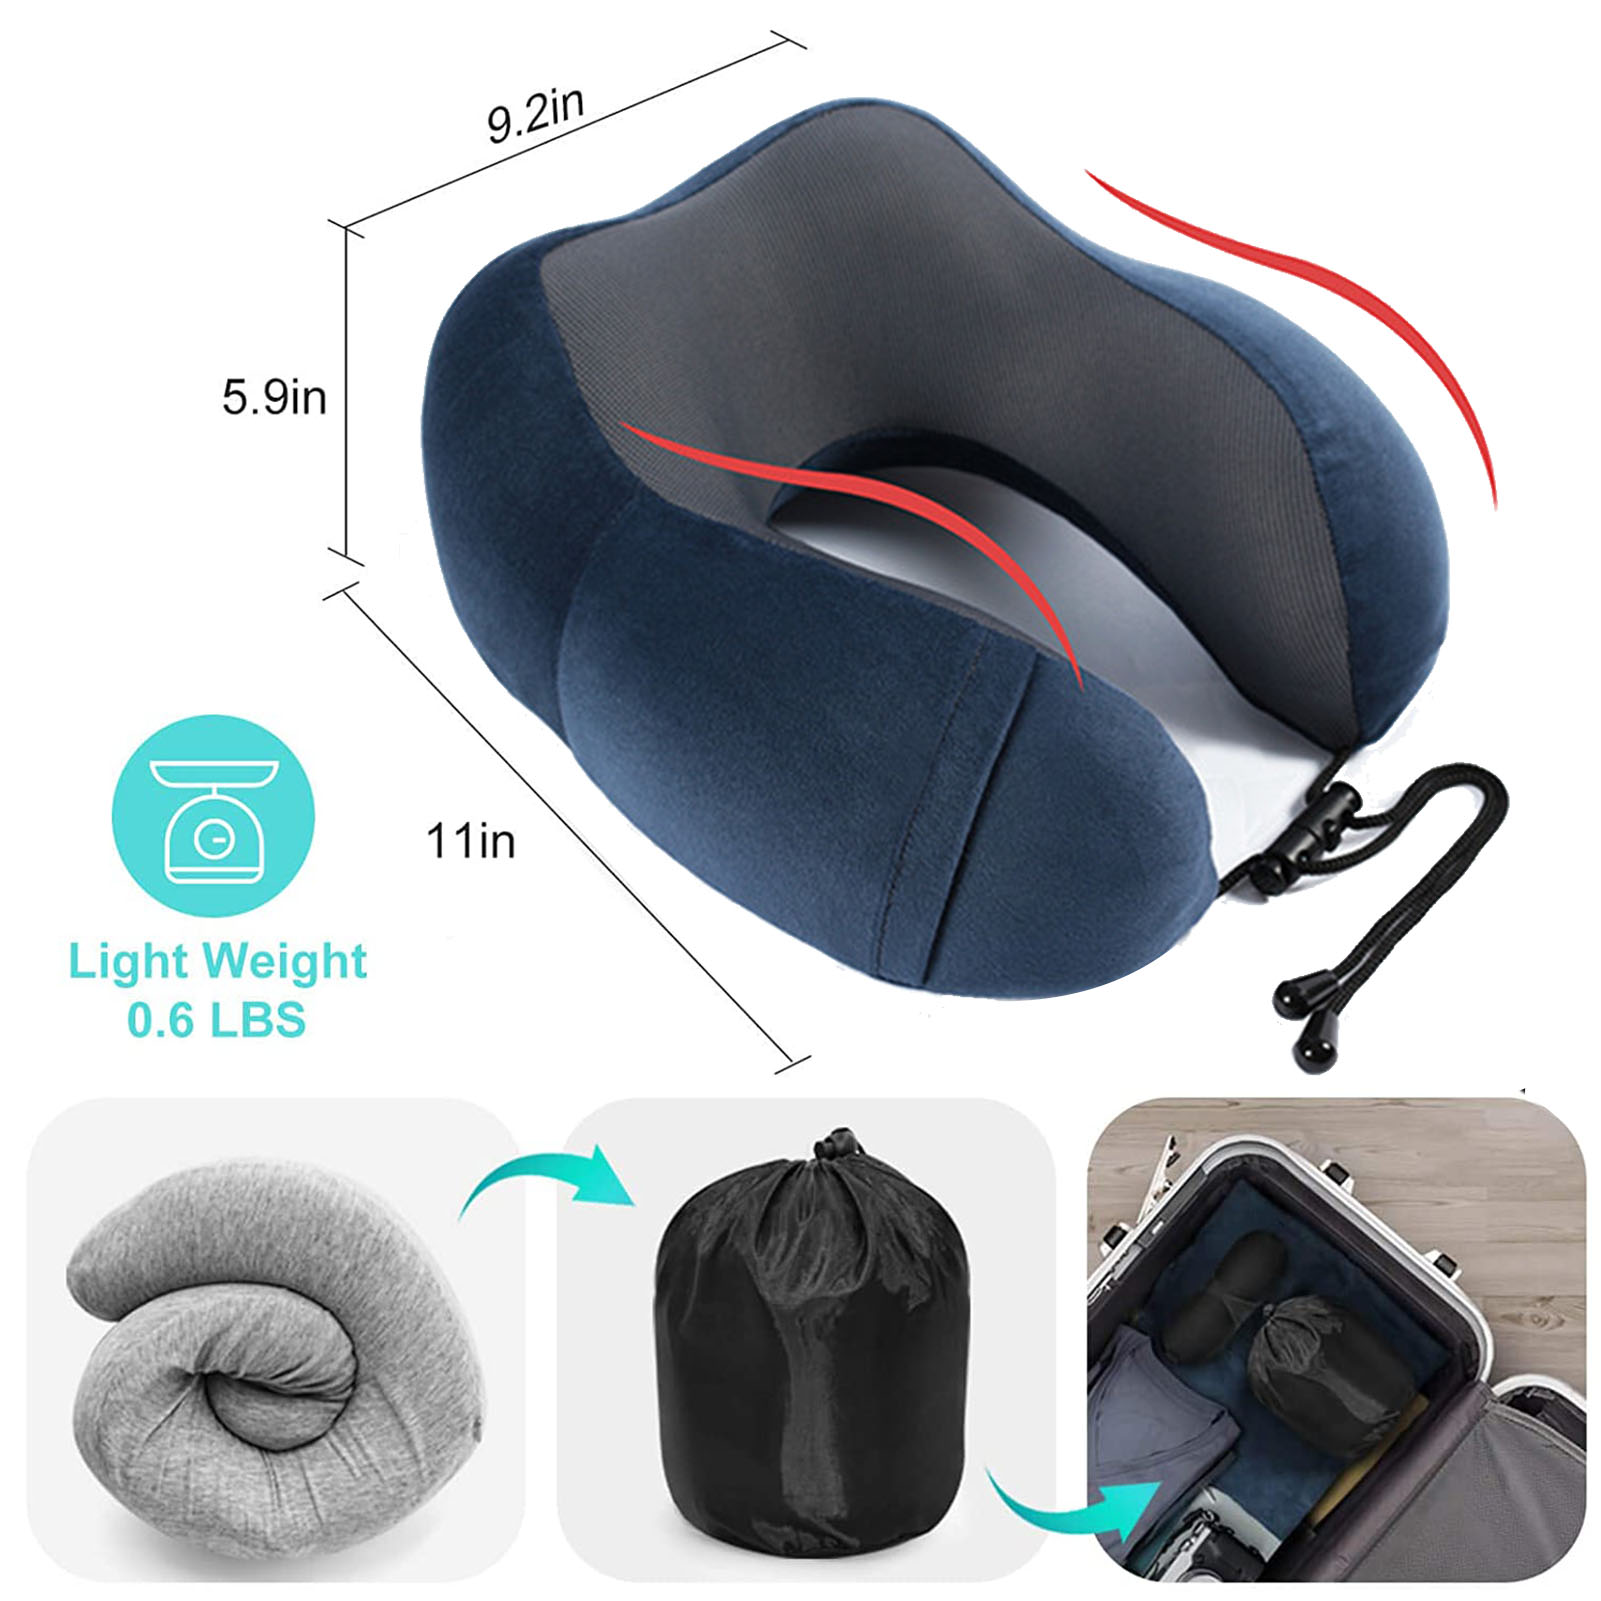 Travel Pillow Luxury Memory Foam Neck & Head Support Pillow Soft Sleeping Rest Cushion for Airplane Car & Home Best Gift (Navy Blue) - image 3 of 7